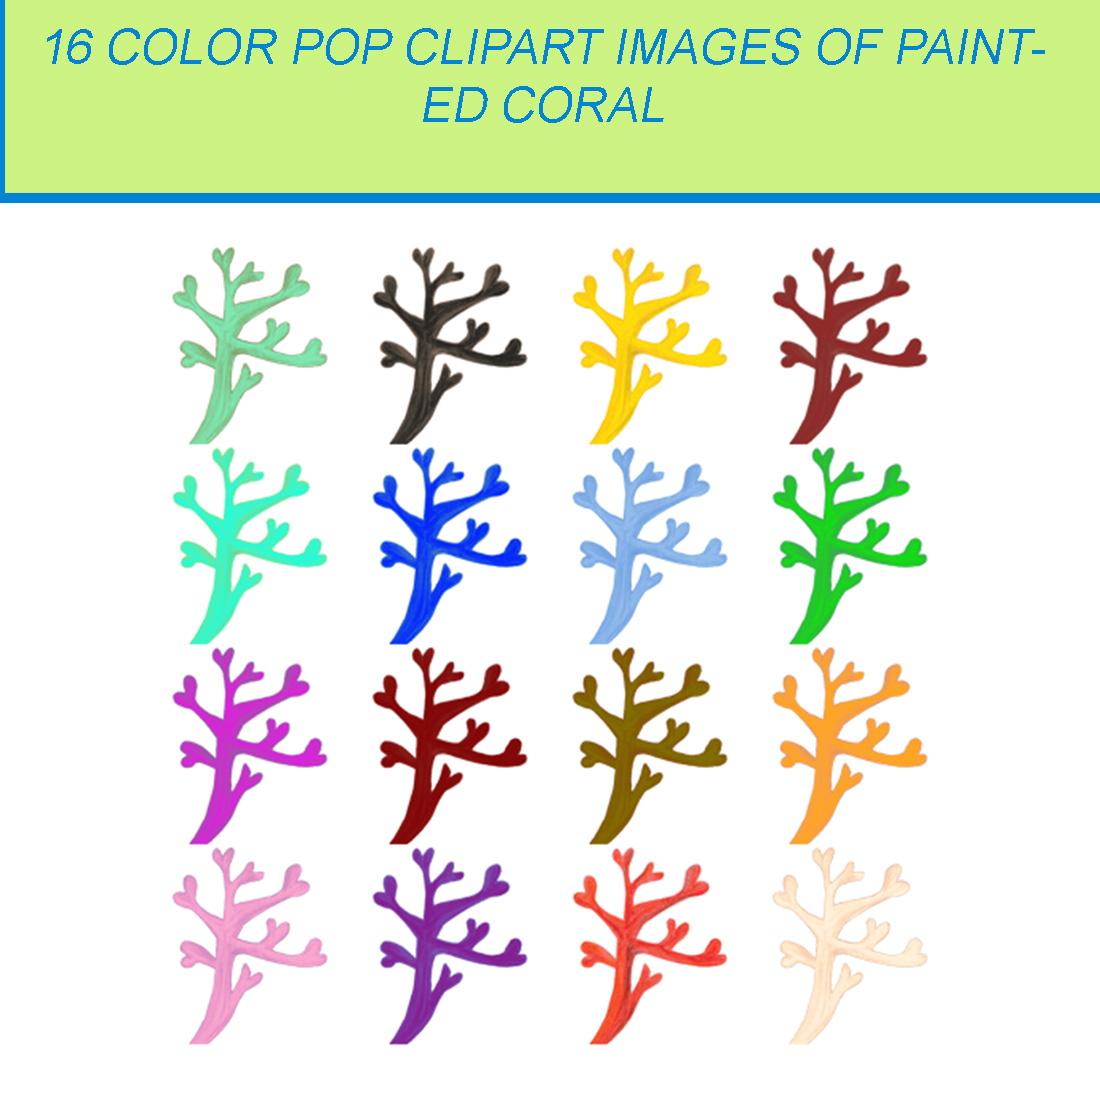 16 COLOR POP CLIPART IMAGES OF PAINTED CORAL cover image.